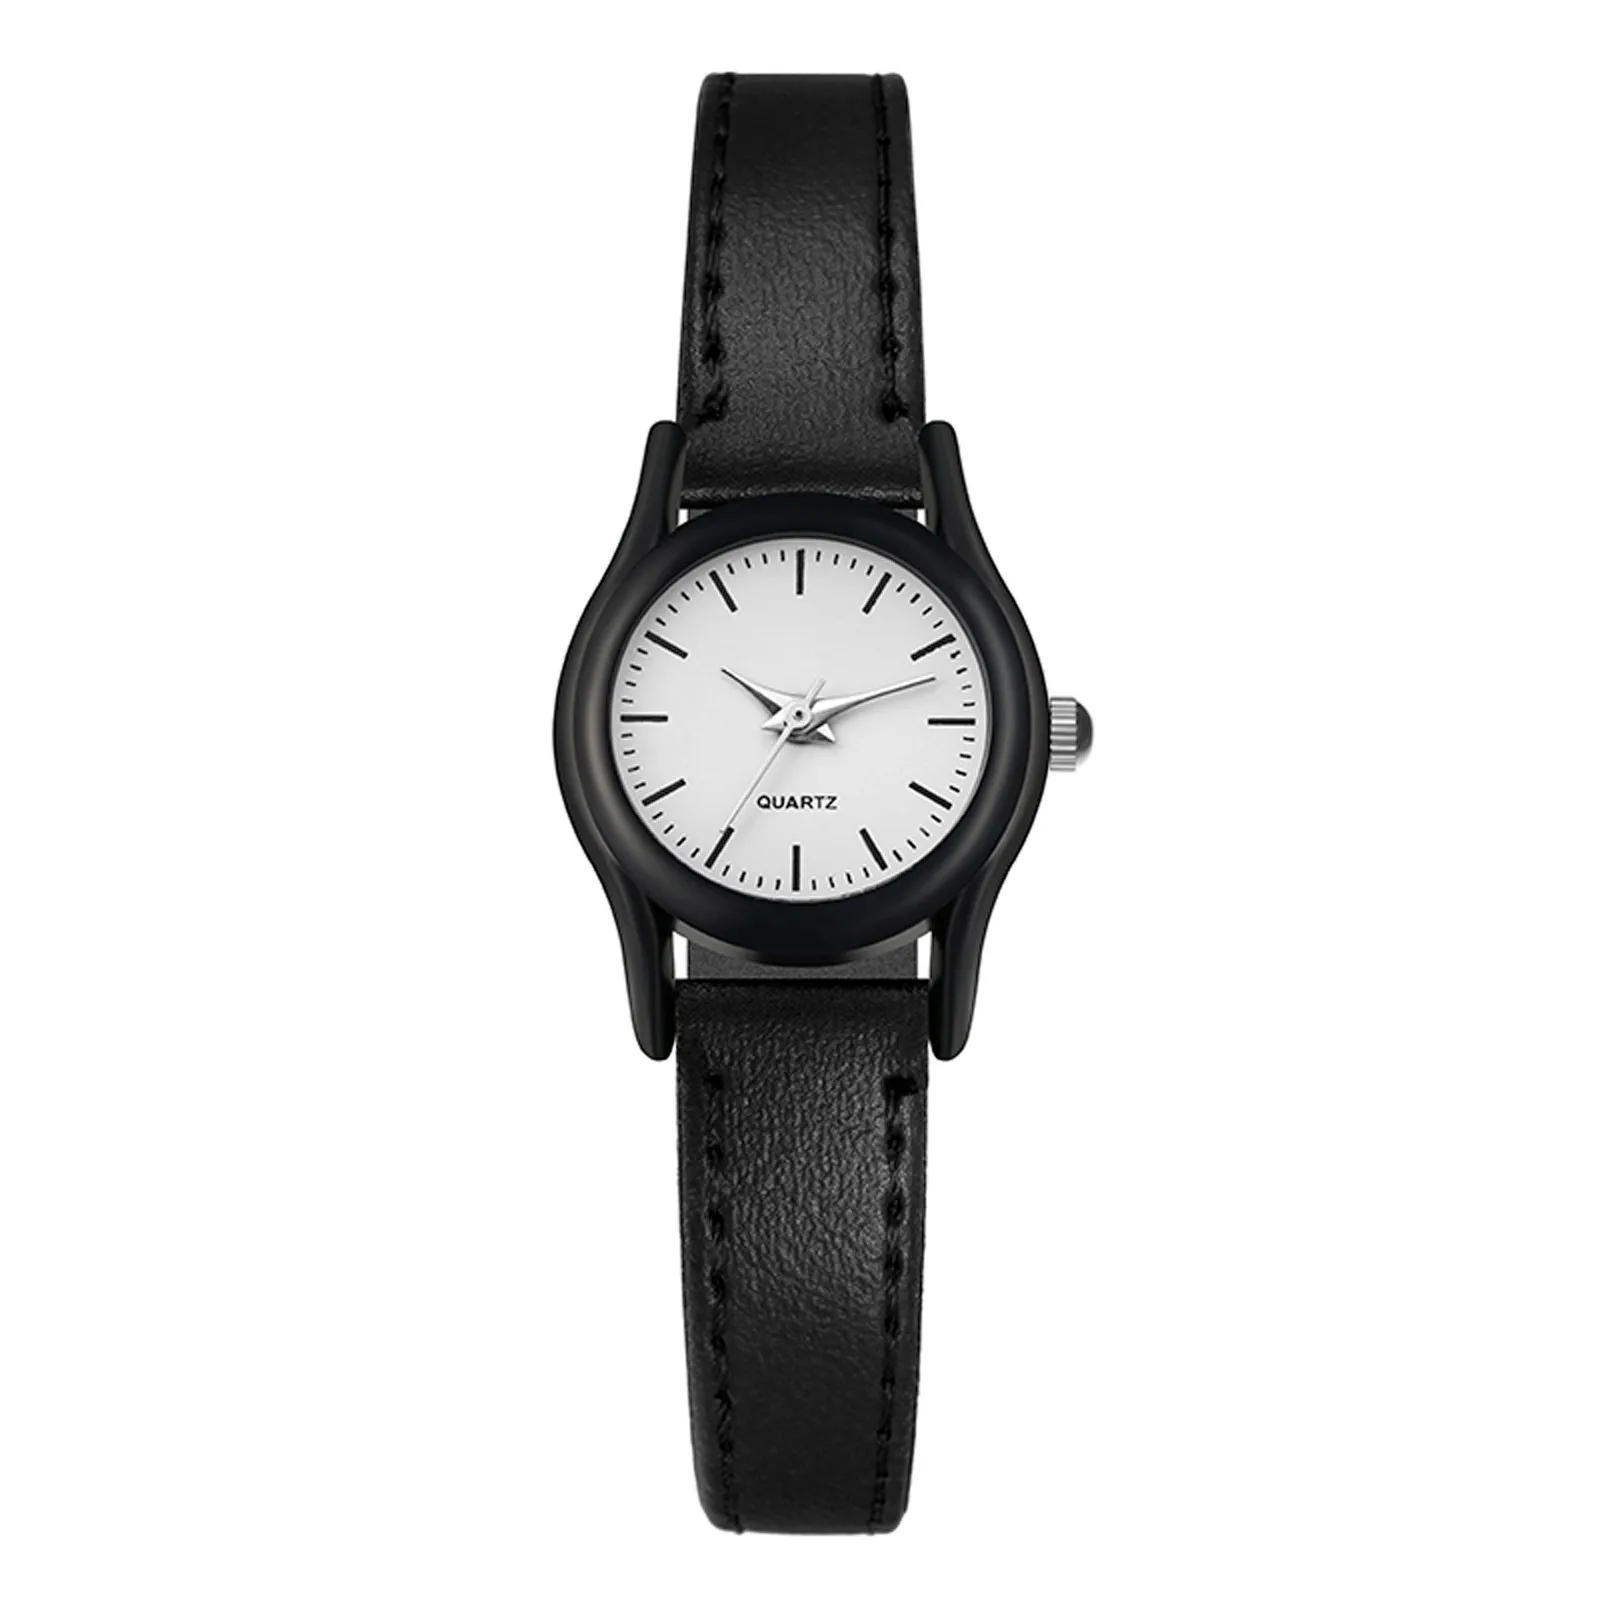 

Watch Women Casual Ladies Watches Unisex Lovers Fashion Business Design Hand Watch Leather Watch Female Clocks Reloj Mujer